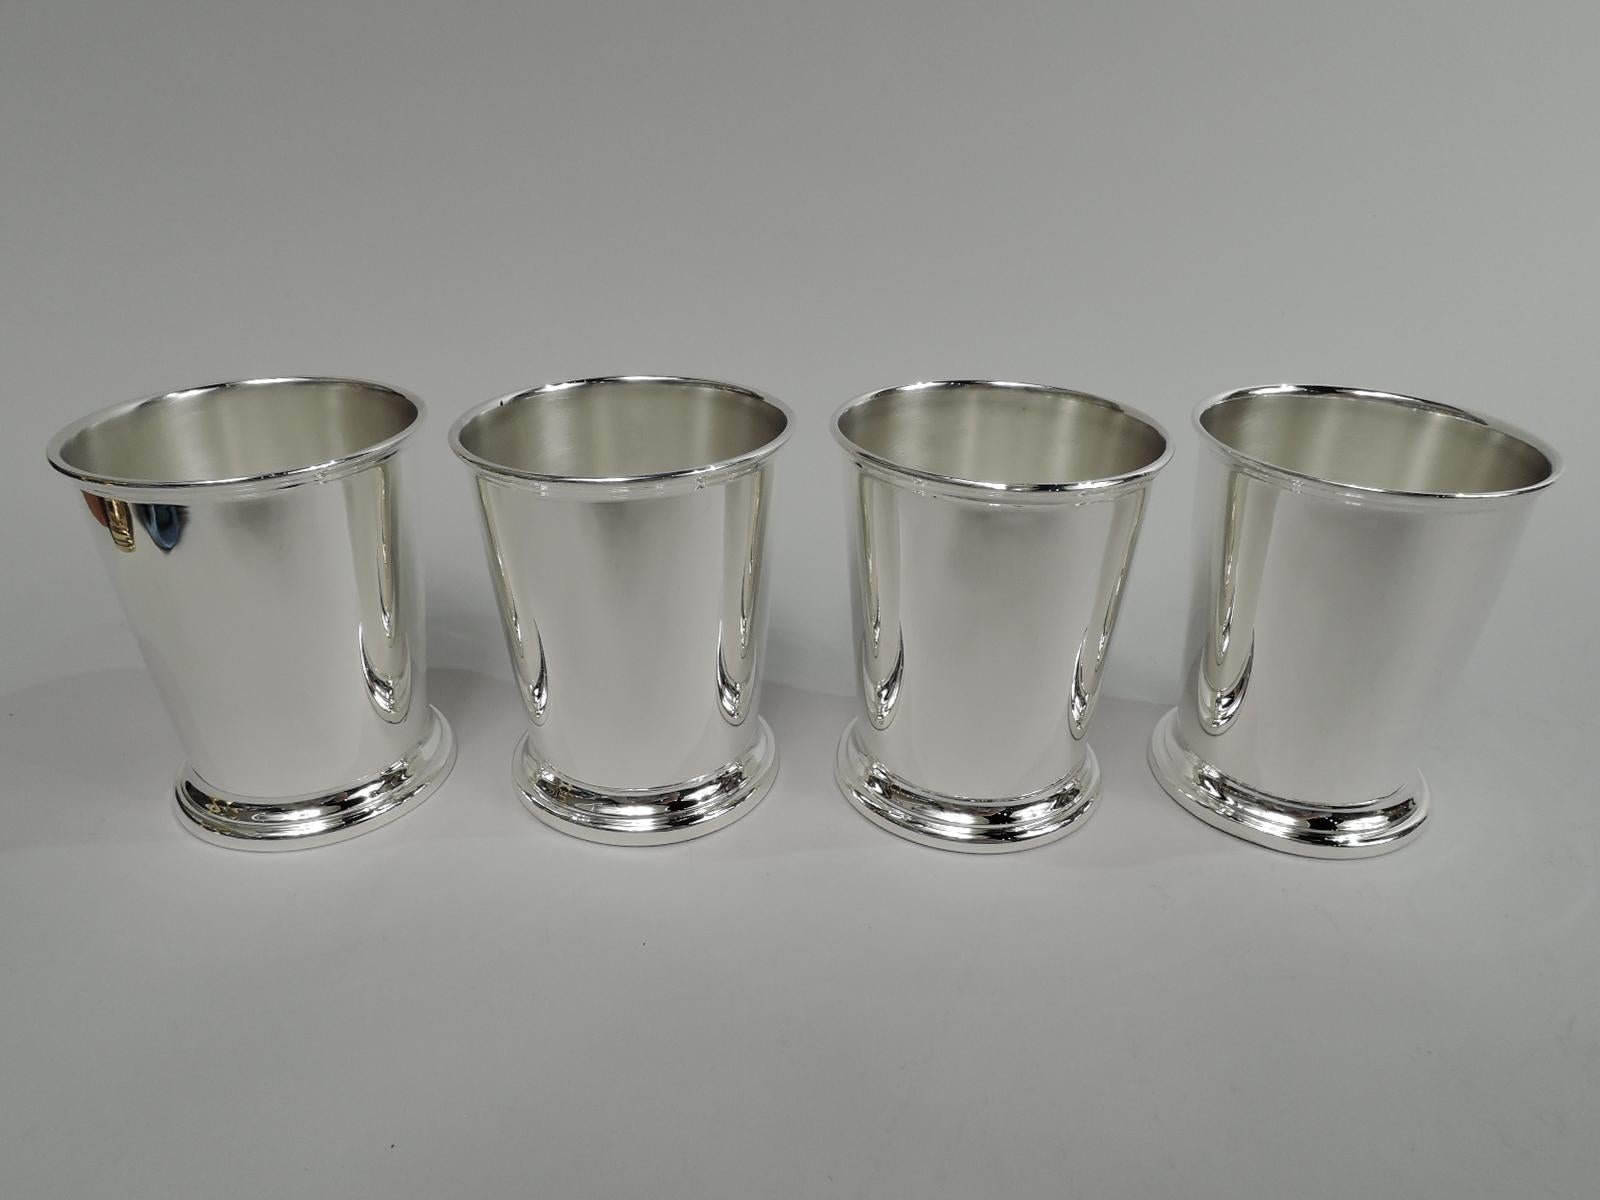 Set of 4 sterling silver mint julep cups. Made by Poole Silver Co. in Taunton, Mass. Each: Straight and tapering sides, molded rim, and skirted foot. All marked “Sterling”. Three have maker’s stamp and no. 58. Total weight: 11.5 troy ounces.